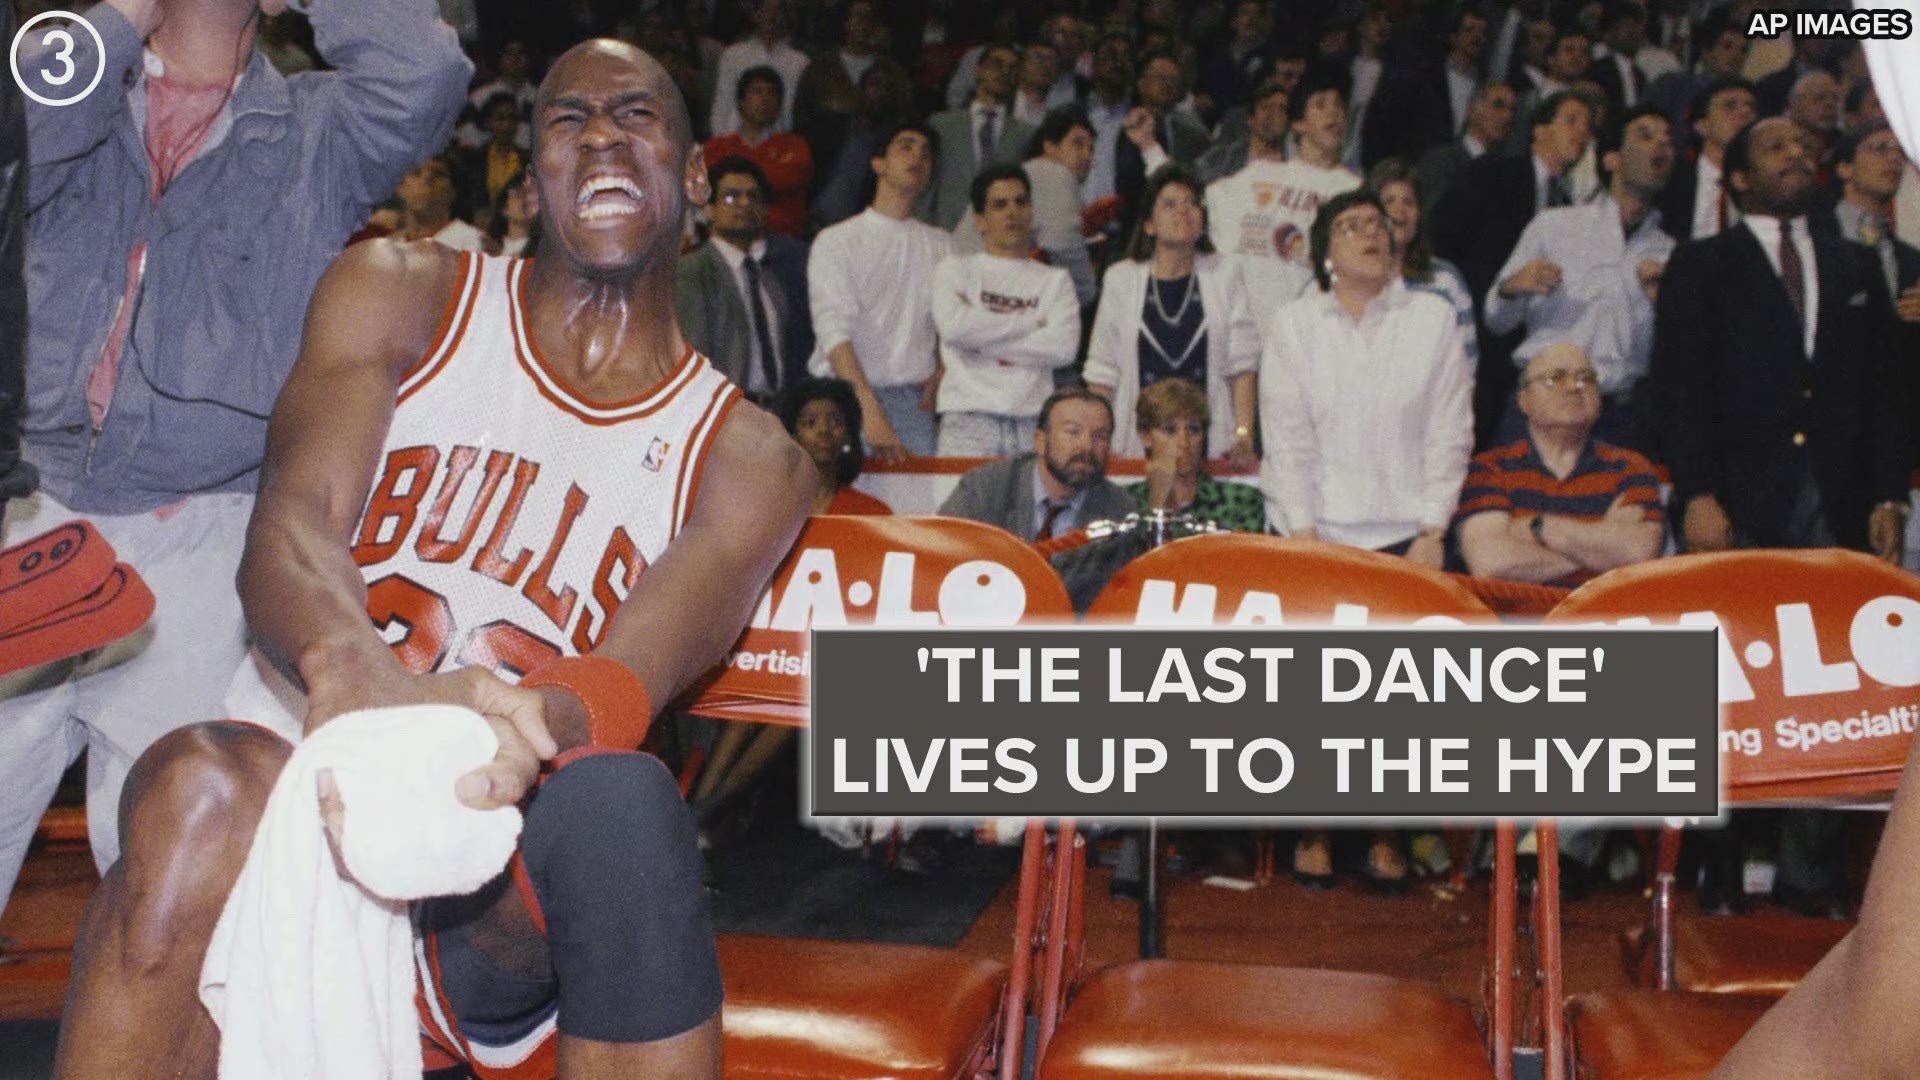 Worth the hype!  On Sunday, ESPN the aired the first two episodes of its 10-part documentary series, "The Last Dance," about Michael Jordan's Chicago Bulls.